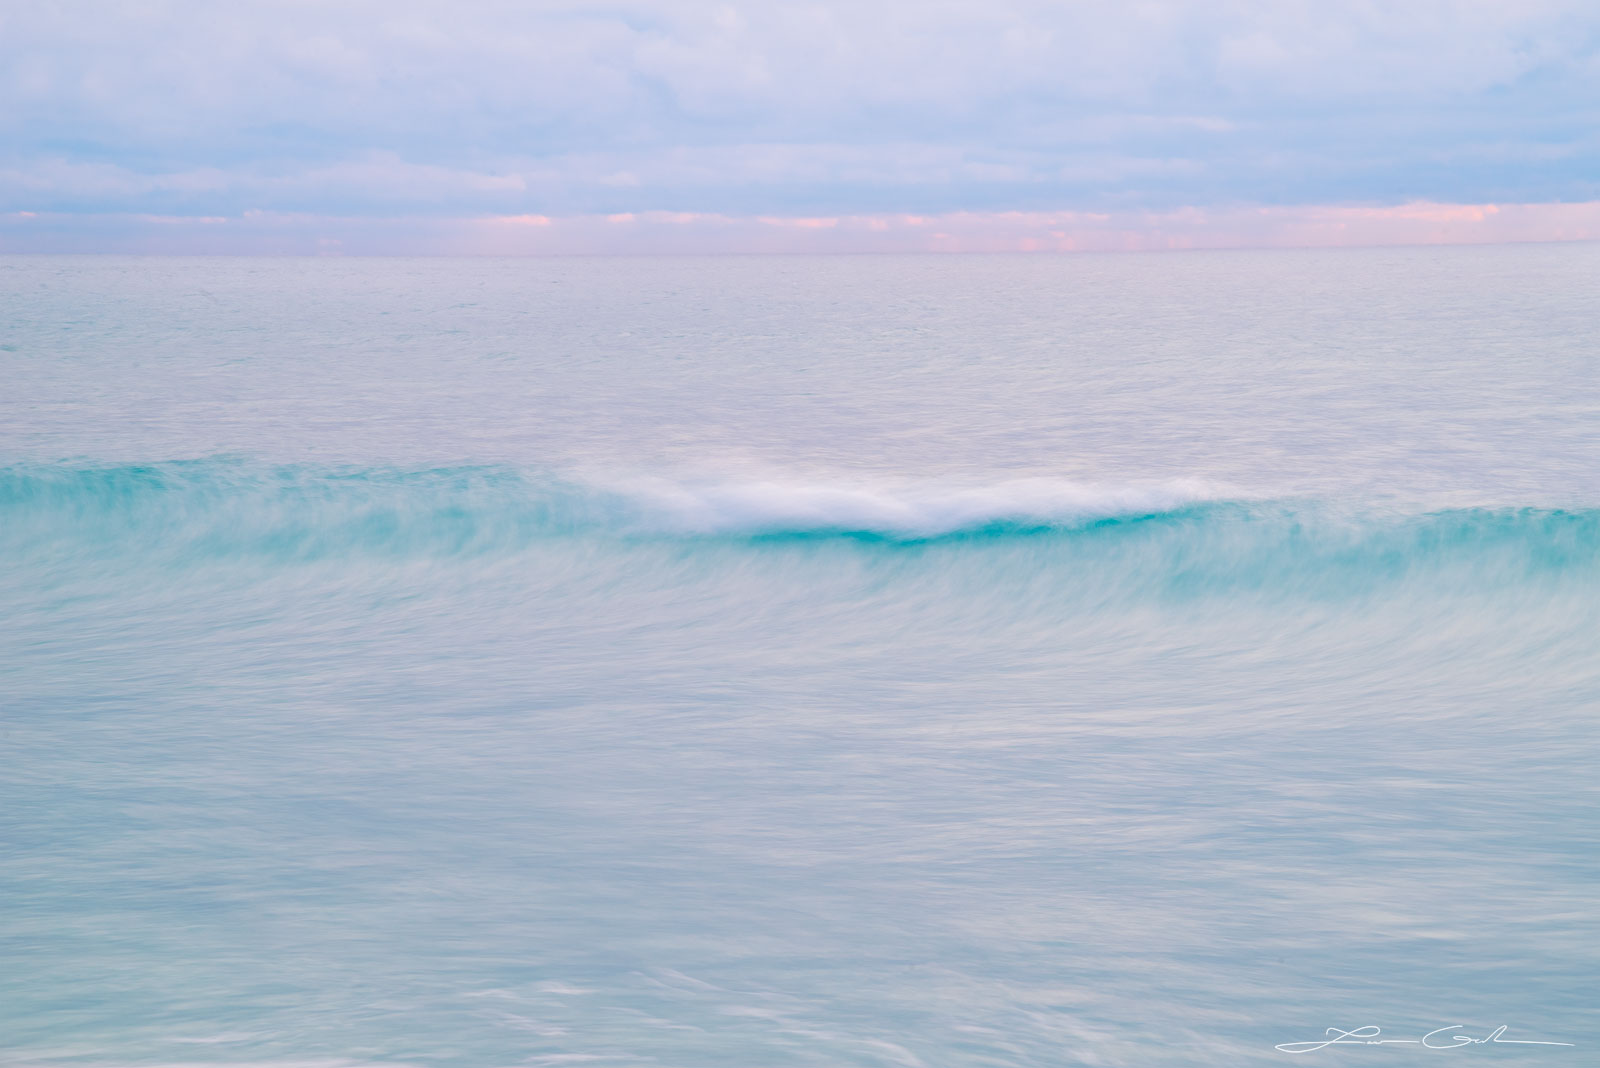 Single wave in a calm blue ocean abstract photograph - Gintchin Fine Art